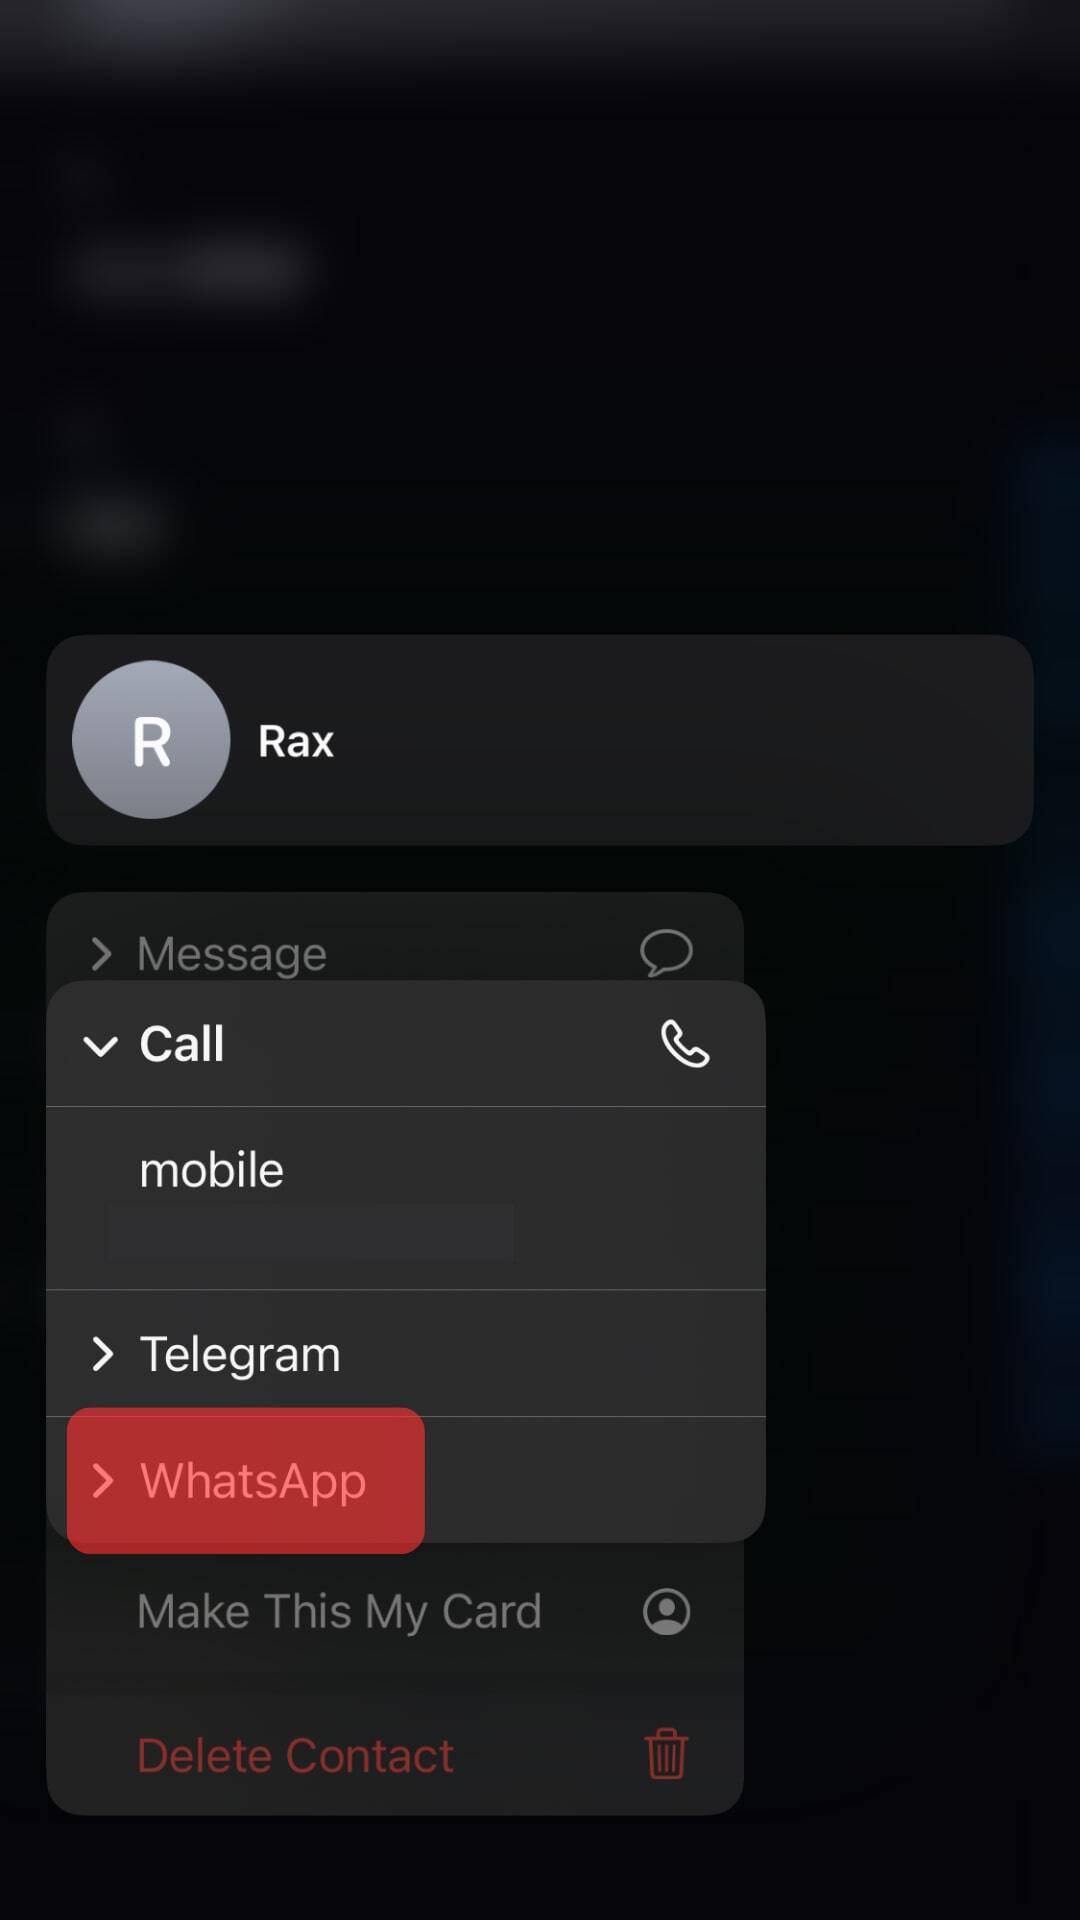 Select Whatsapp From The Listed Calling Options.